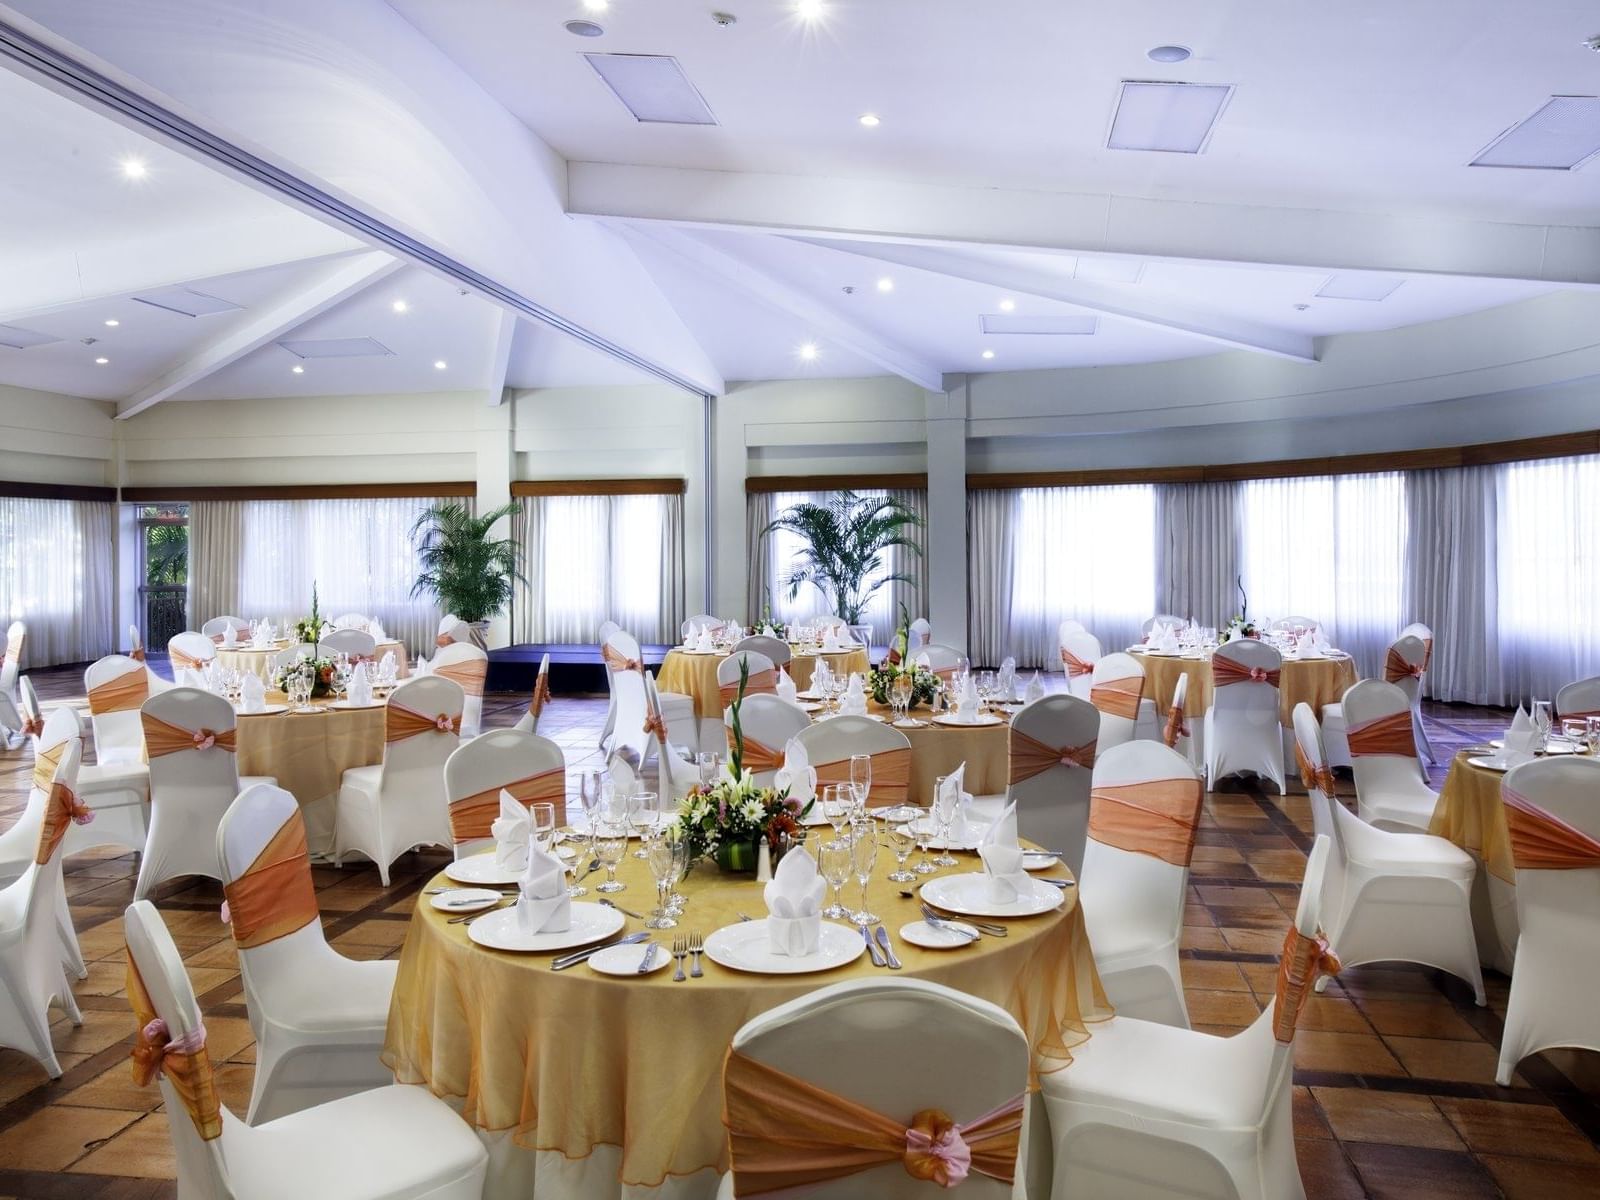 Banquet tables with decors in EI Roble Hall at Fiesta Resort